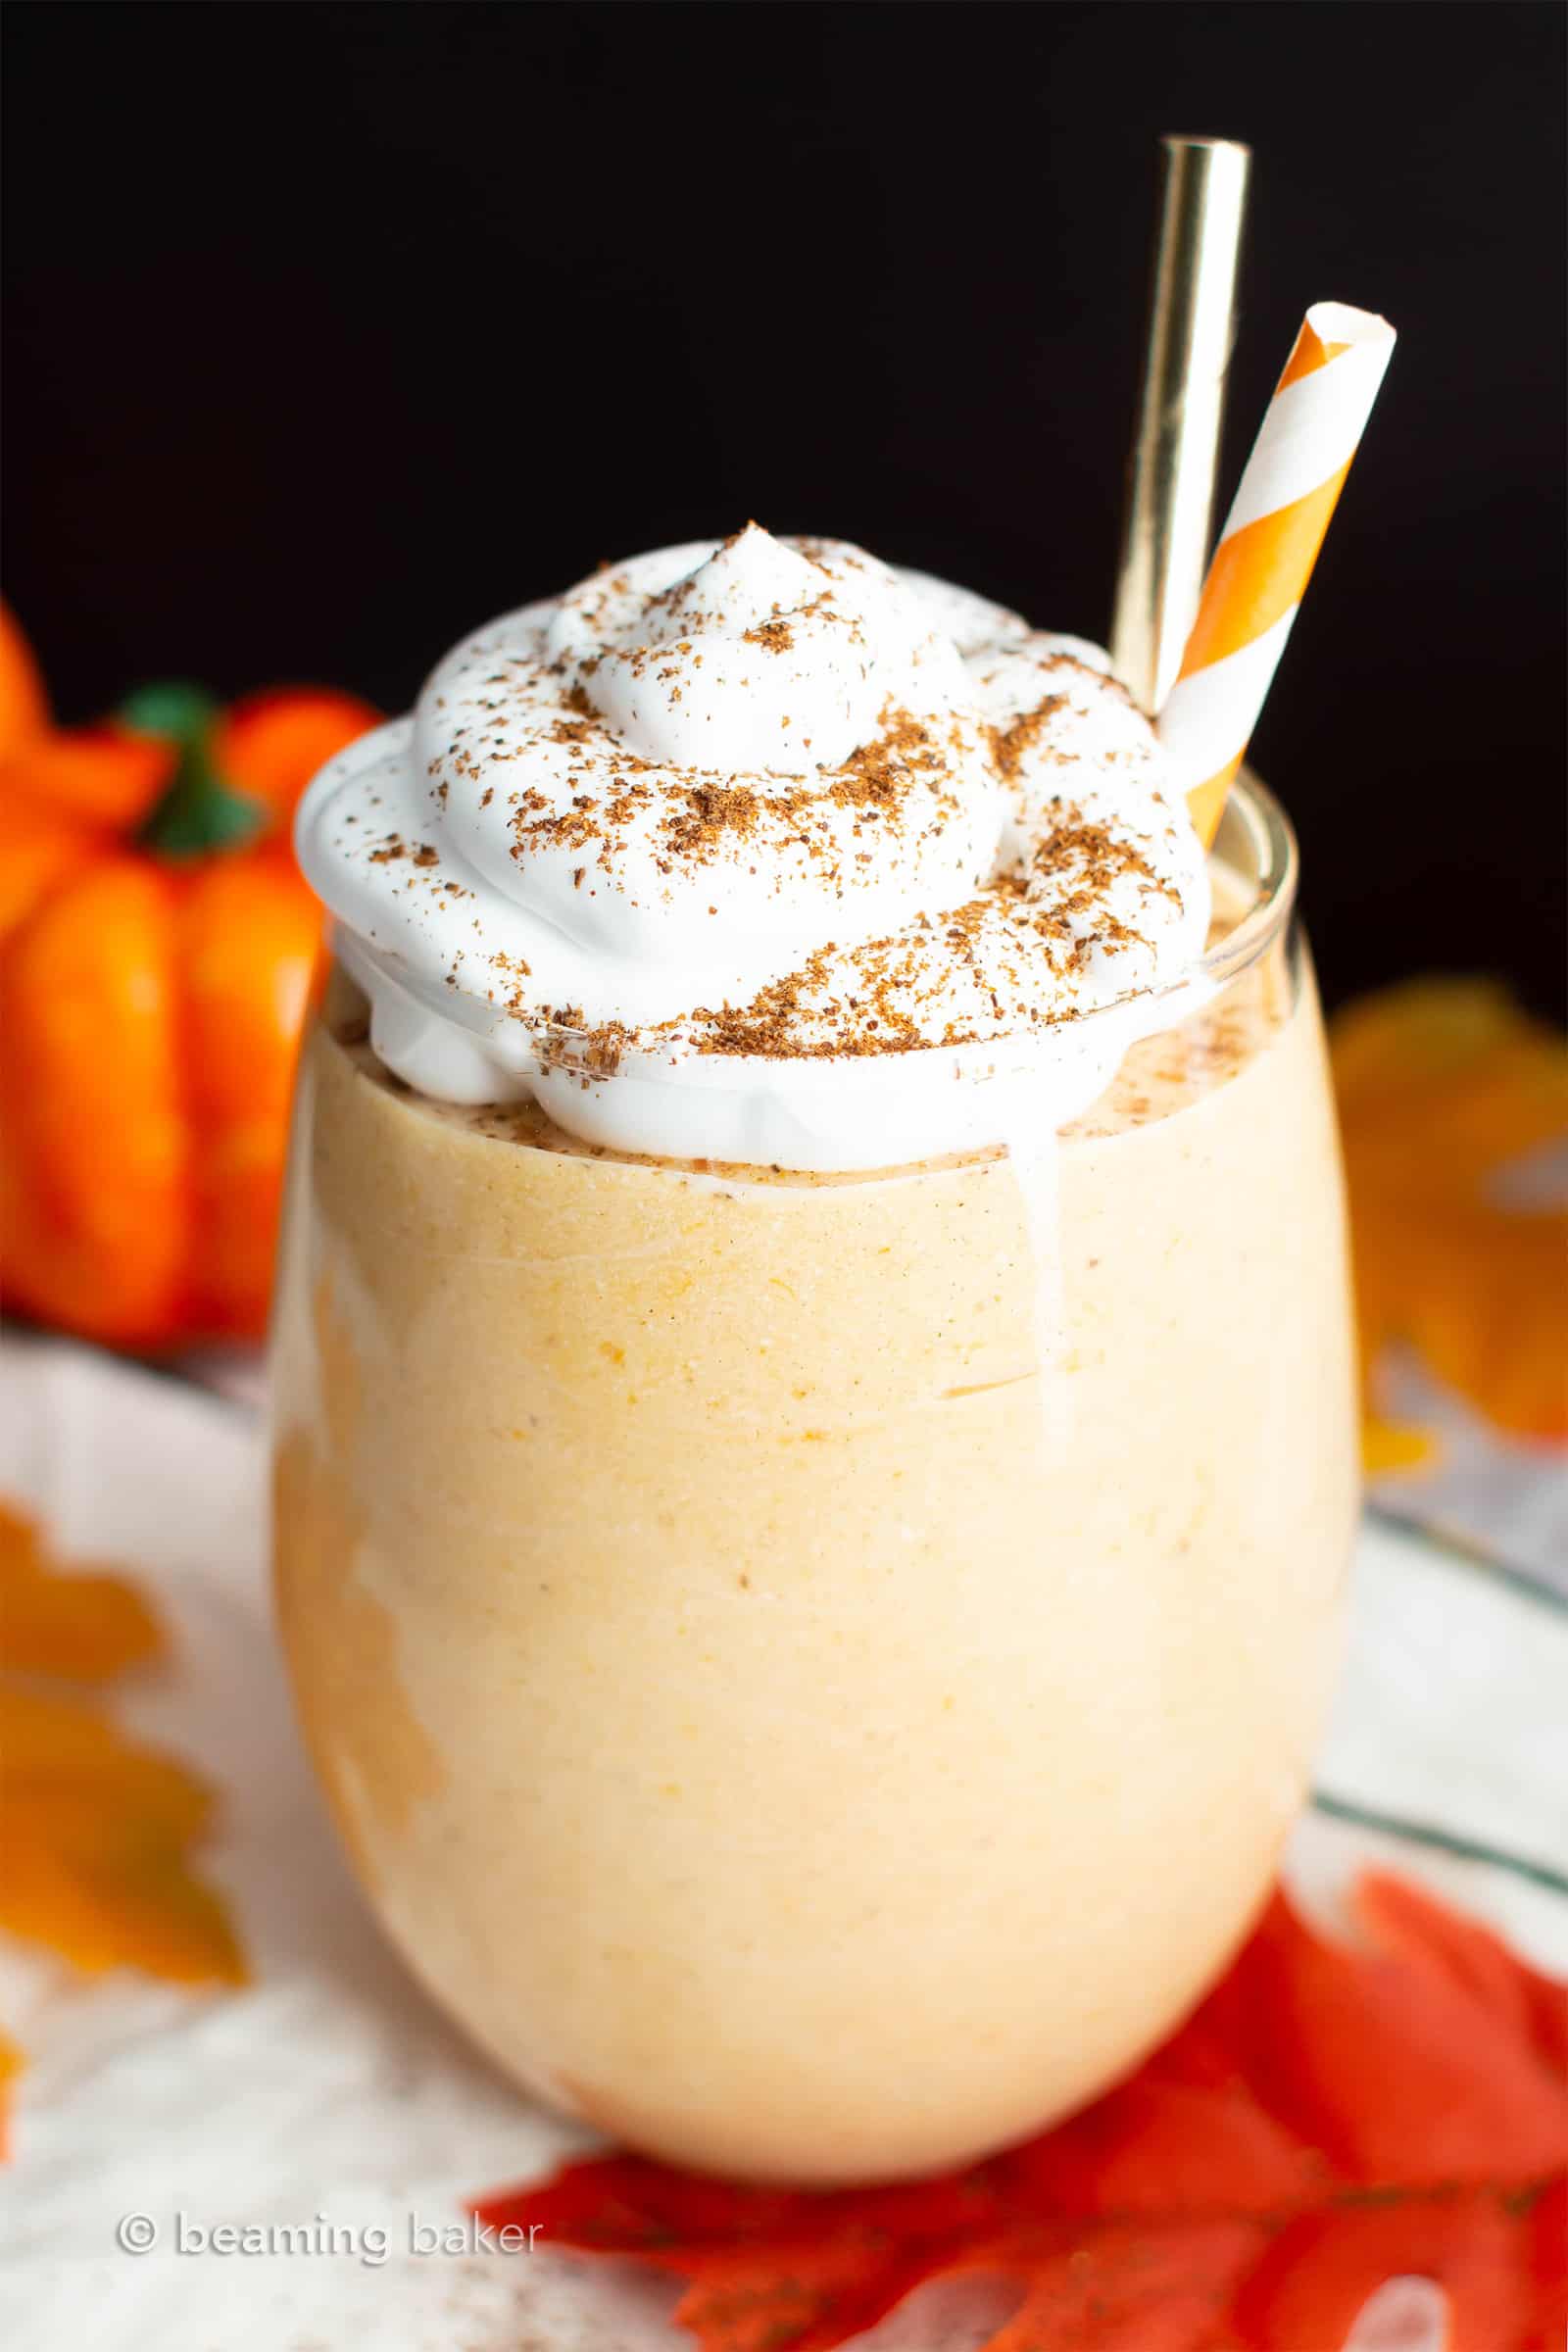 15 Easy Vegan Pumpkin Desserts (GF): an amazing collection of easy pumpkin dessert recipes that are vegan, gluten-free and healthy! The best pumpkin desserts, packed with your favorite fall flavors! #Healthy #Vegan #GlutenFree #Pumpkin #Dessert | Recipes at BeamingBaker.com